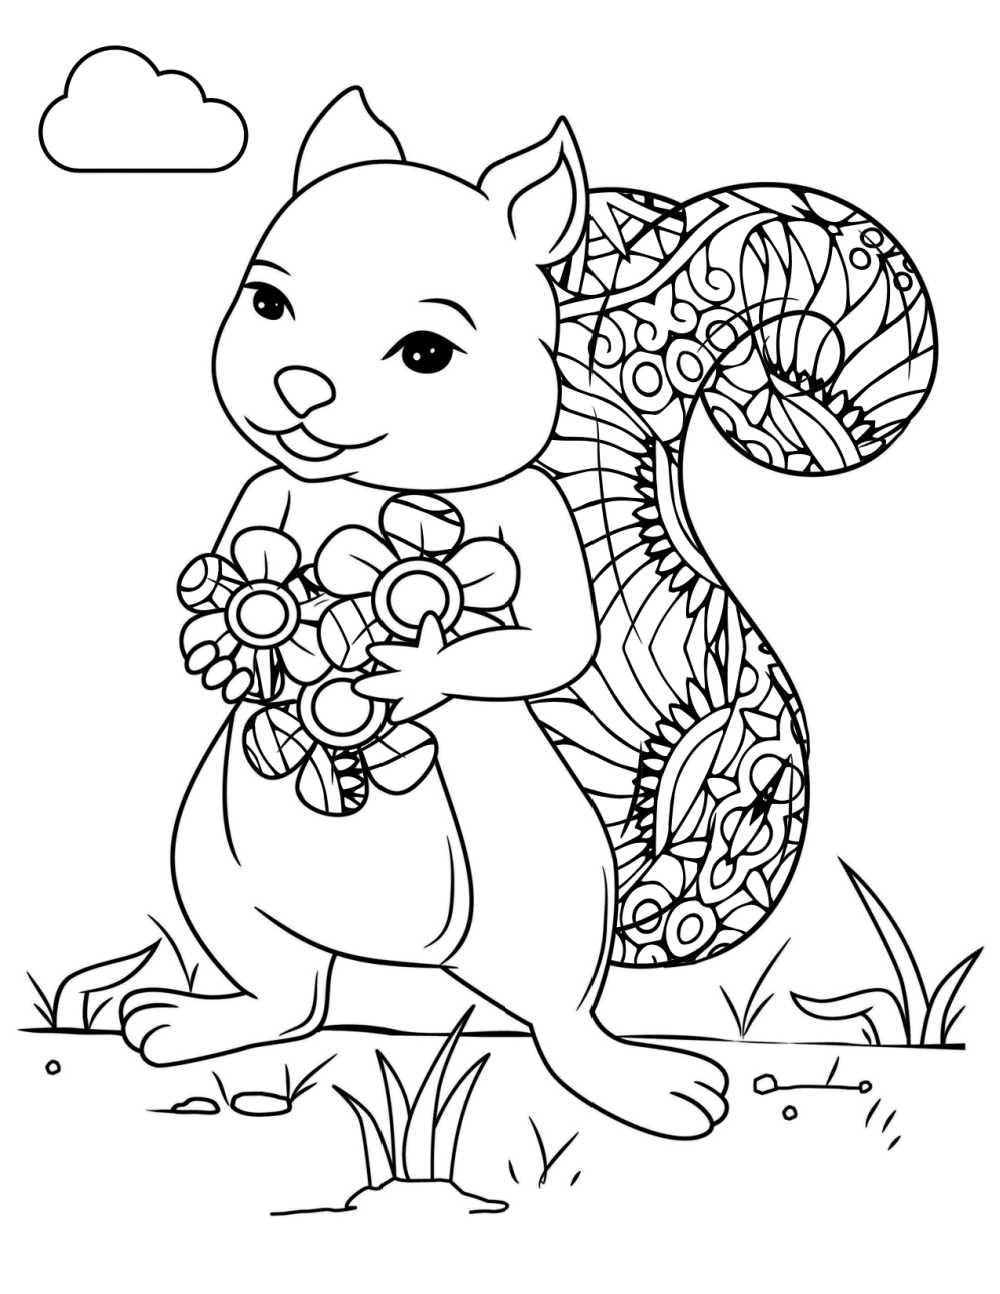 printable squirrel flowers coloring page.